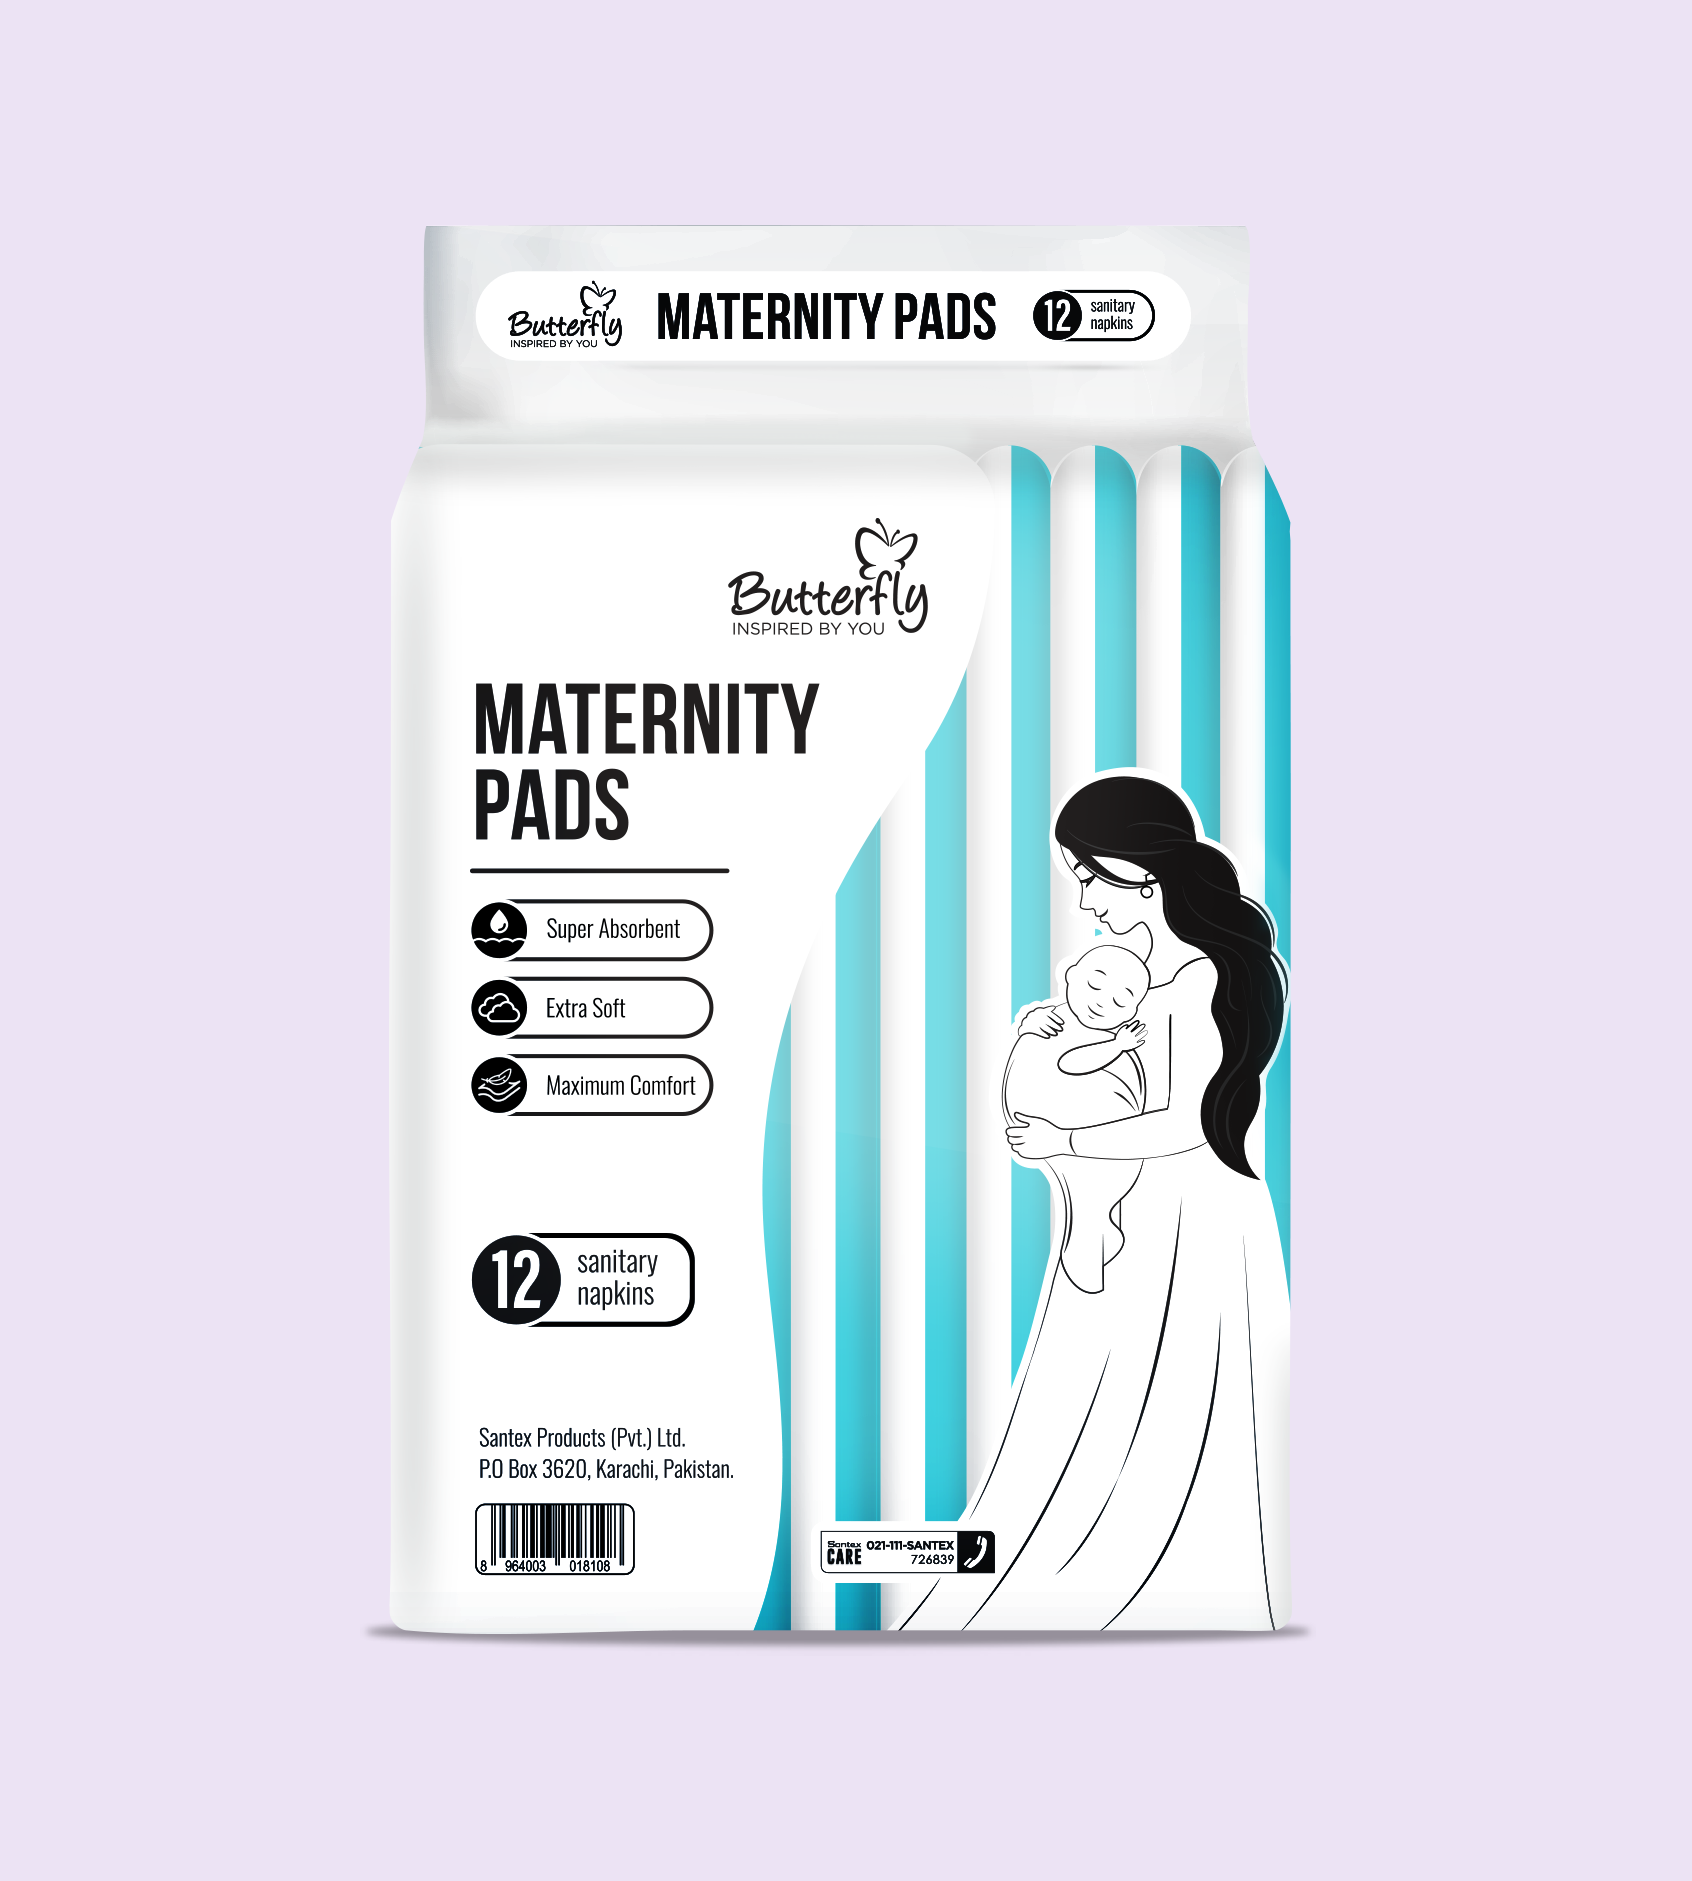 Mother Comfort Maternity Pads Price in Pakistan